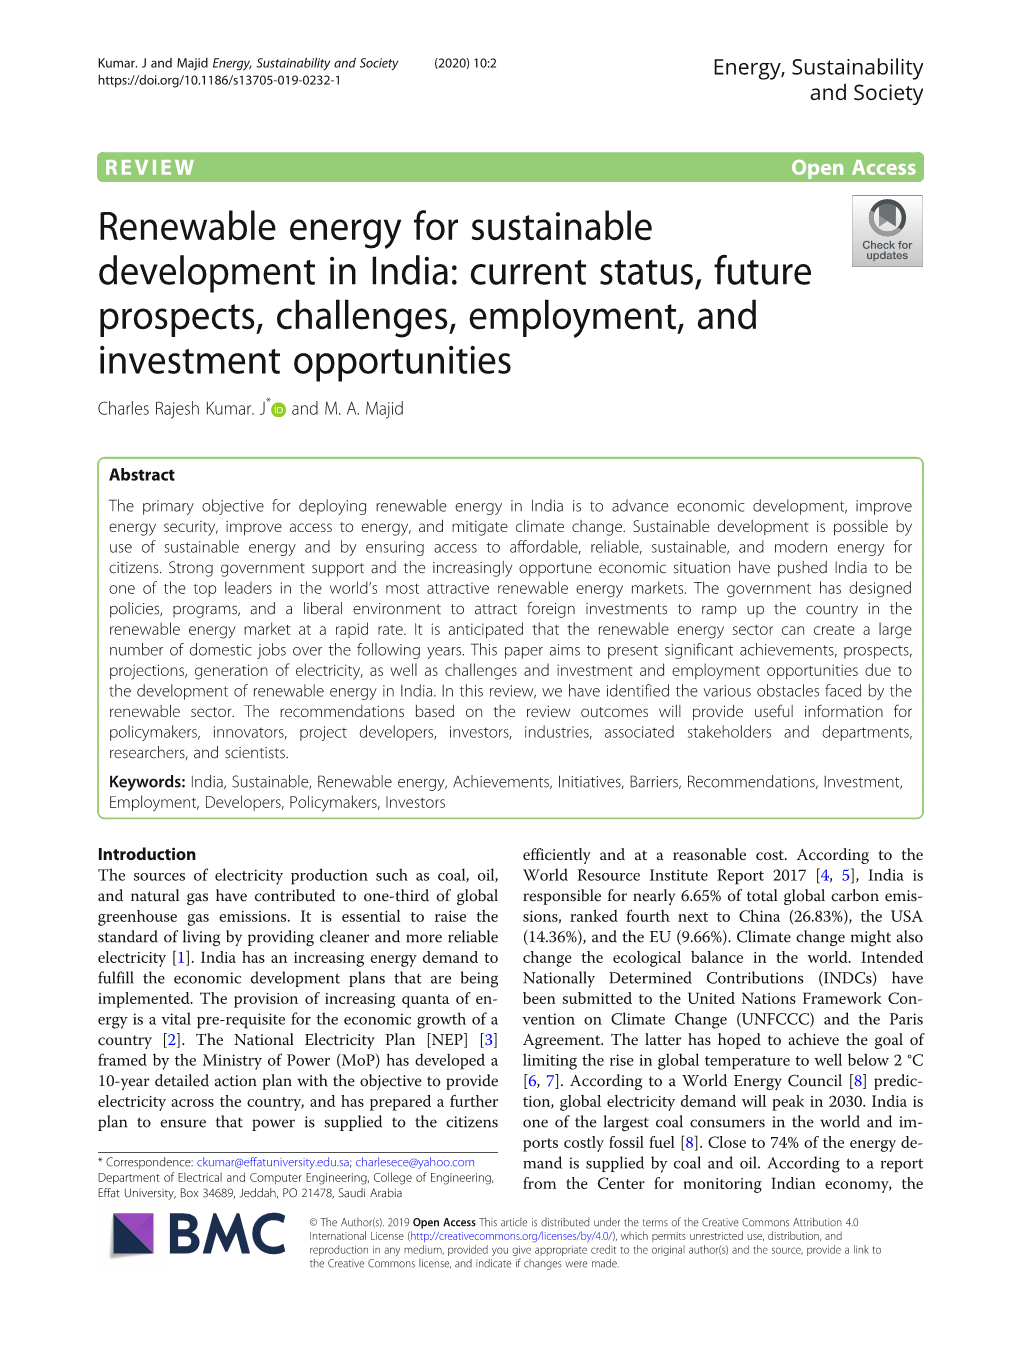 Renewable Energy for Sustainable Development in India: Current Status, Future Prospects, Challenges, Employment, and Investment Opportunities Charles Rajesh Kumar